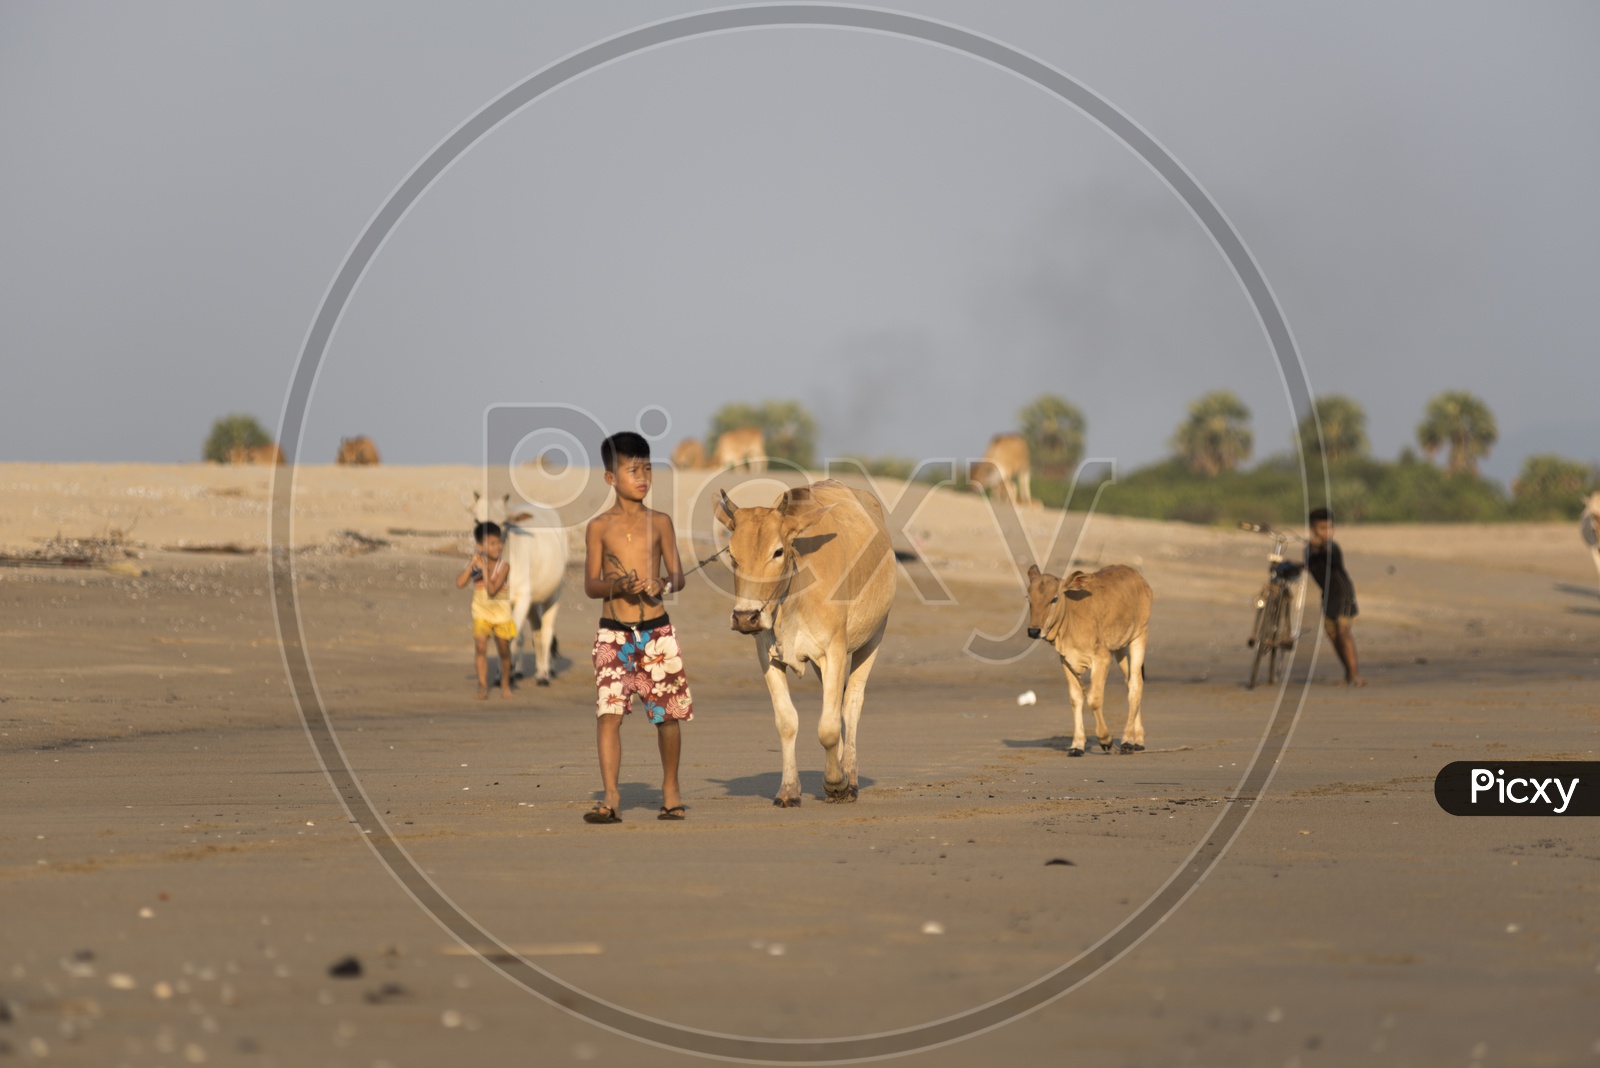 Mandalay children with cattle on field